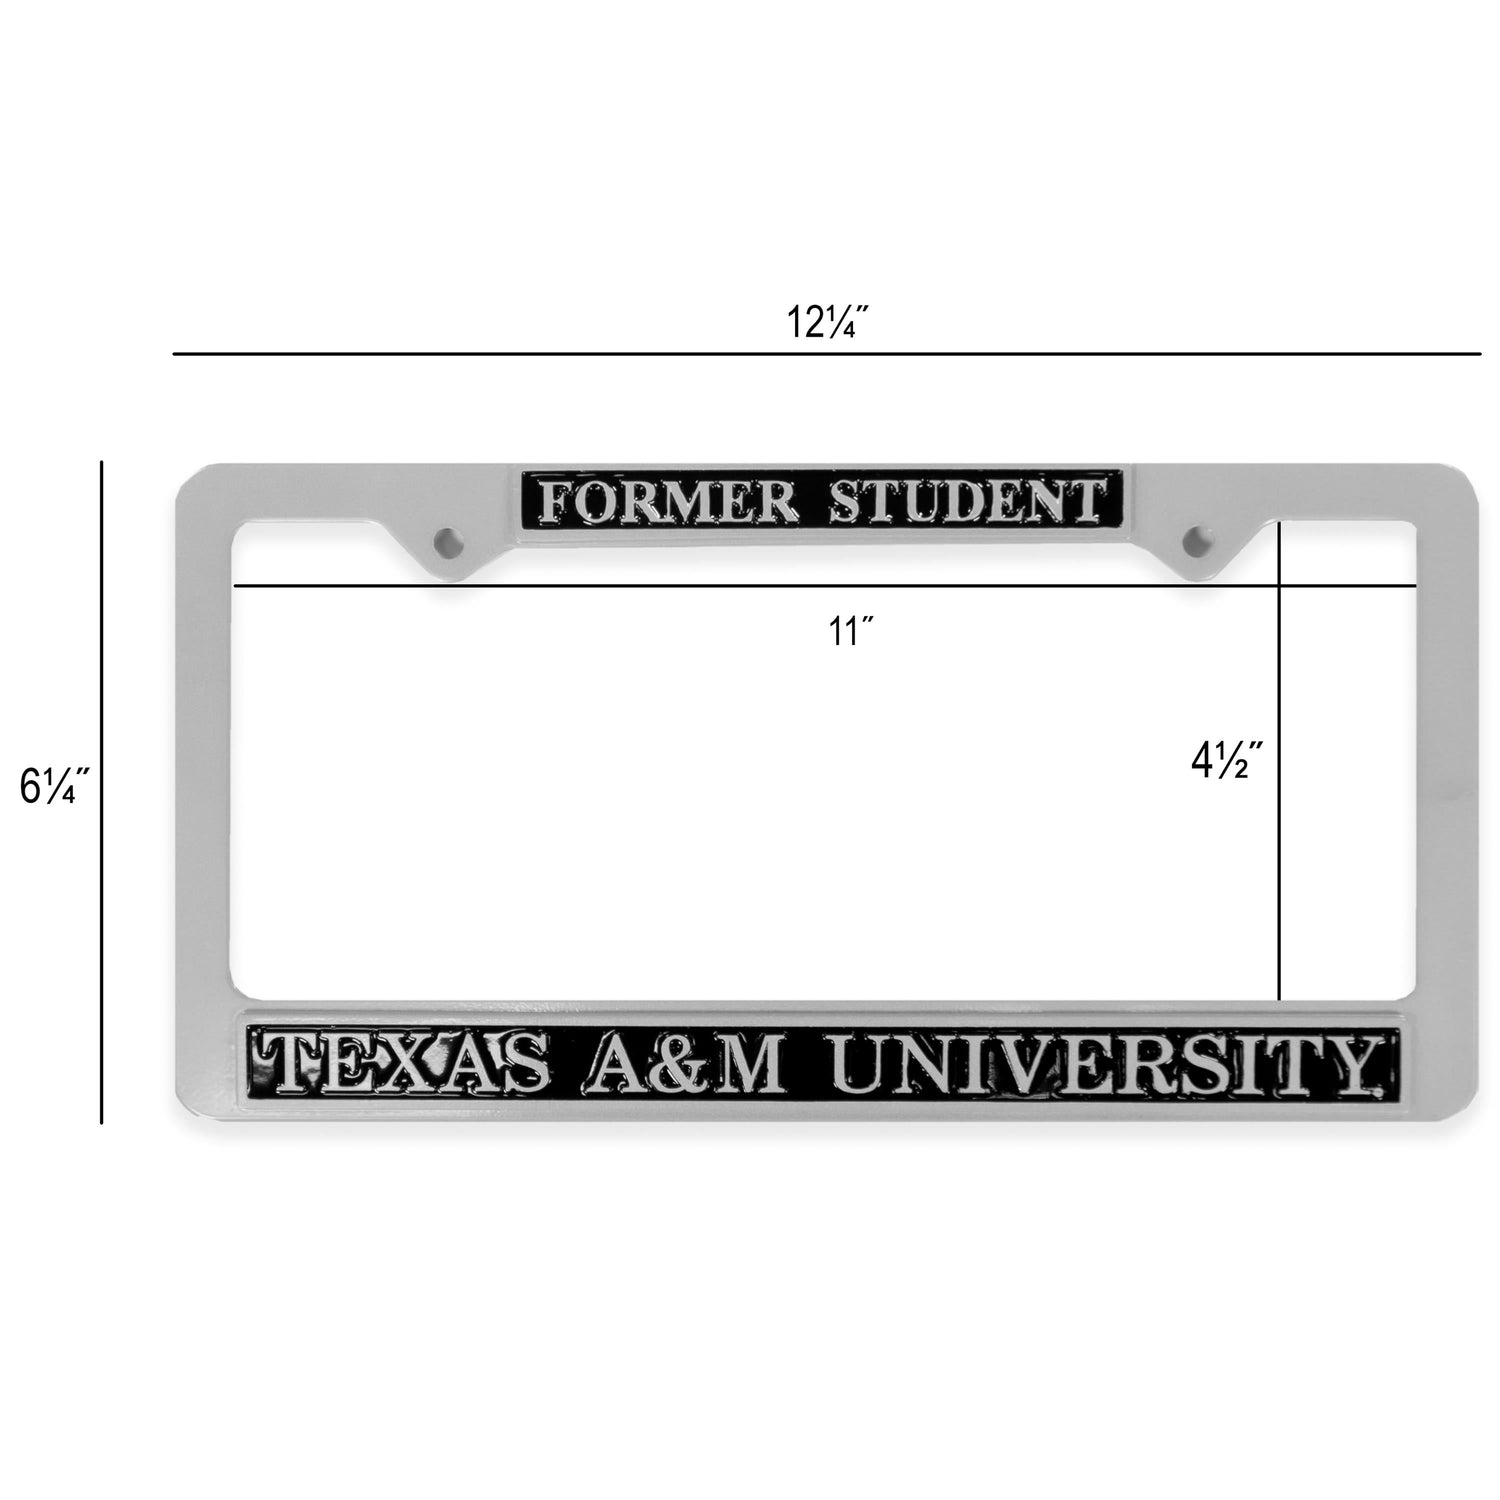 Texas A&M Former Student License Plate Frame